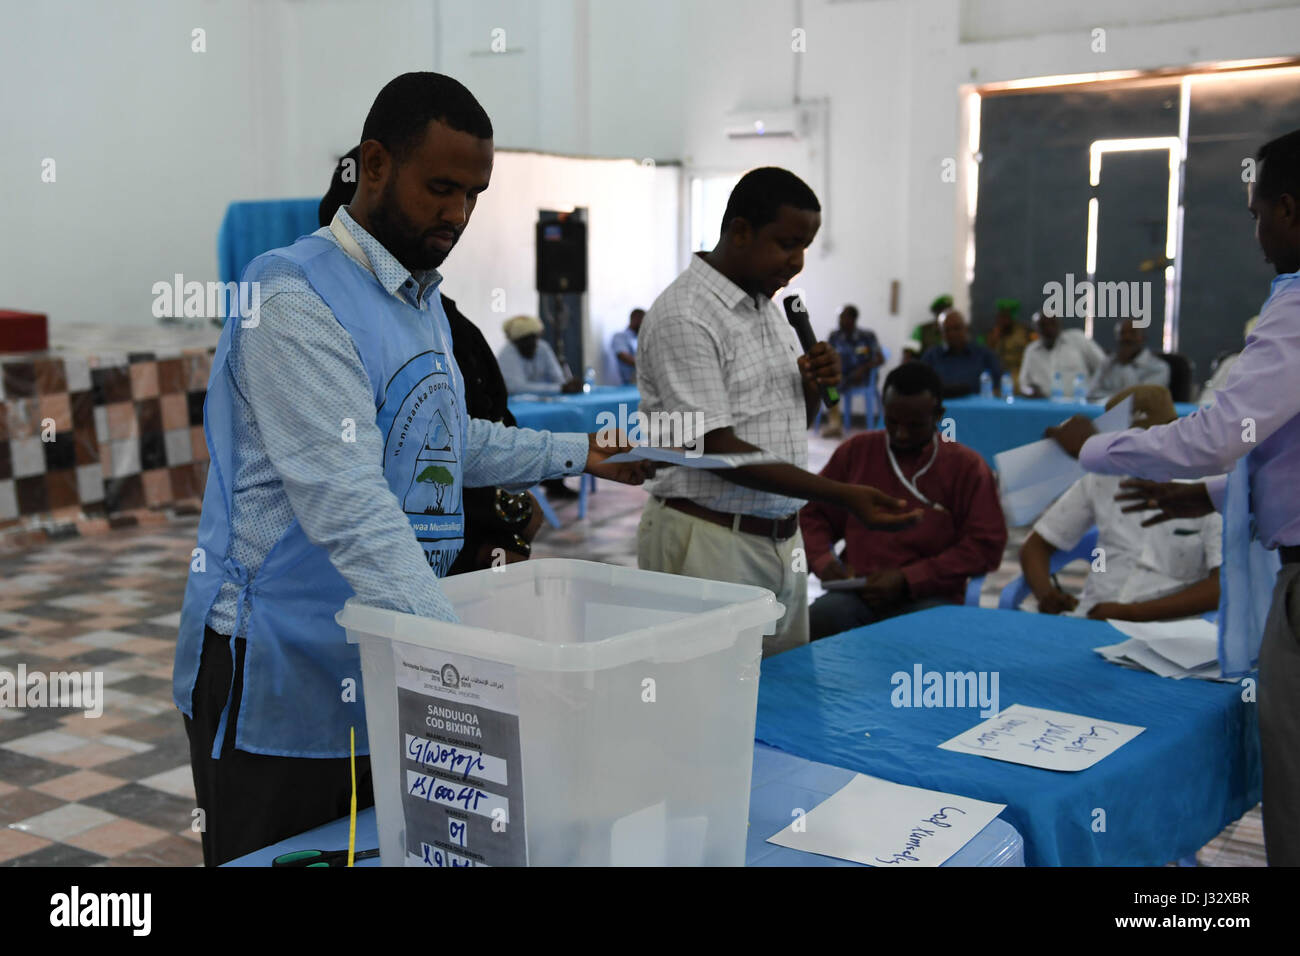 Electoral officials count votes during the ongoing electoral process to choose Somaliland's representatives to the Upper House of the Federal Parliament in Mogadishu, Somalia, on January 8, 2017. AMISOM Photo / Omar Abdisalan Stock Photo